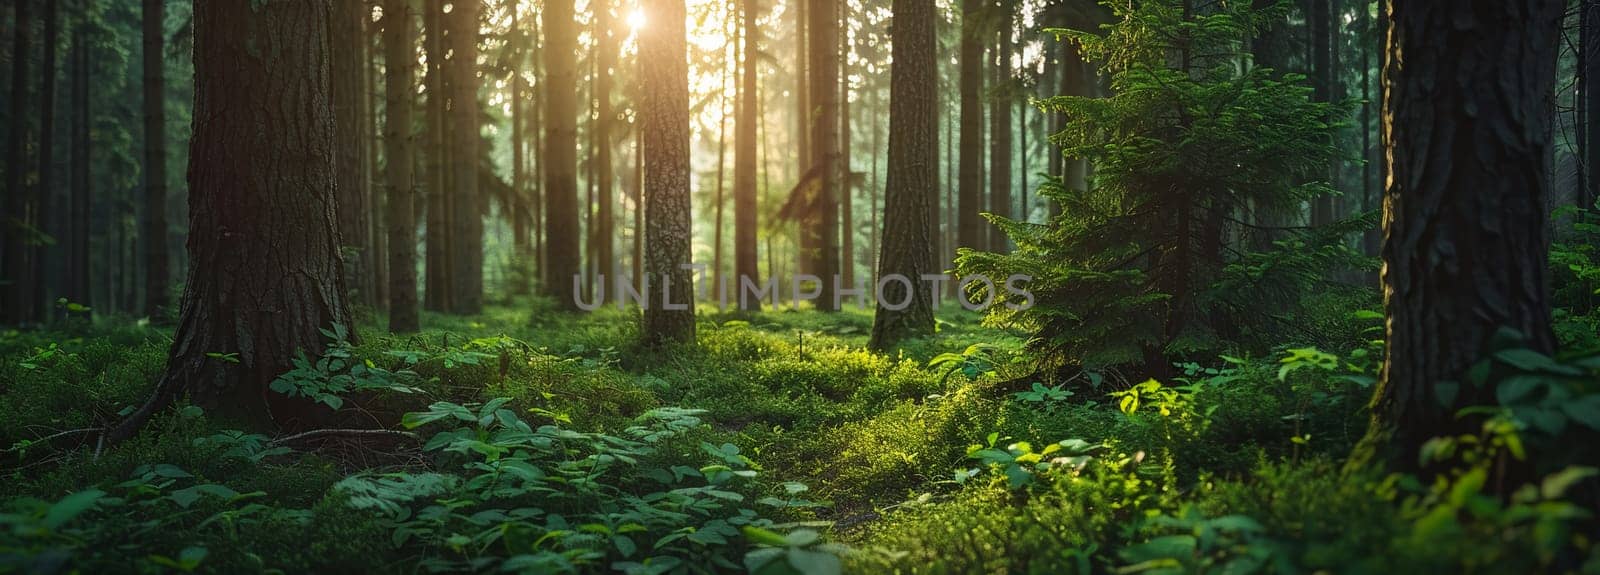 Lush green summer forest bathed in golden sunlight with sunbeams piercing through dense trees and foliage.